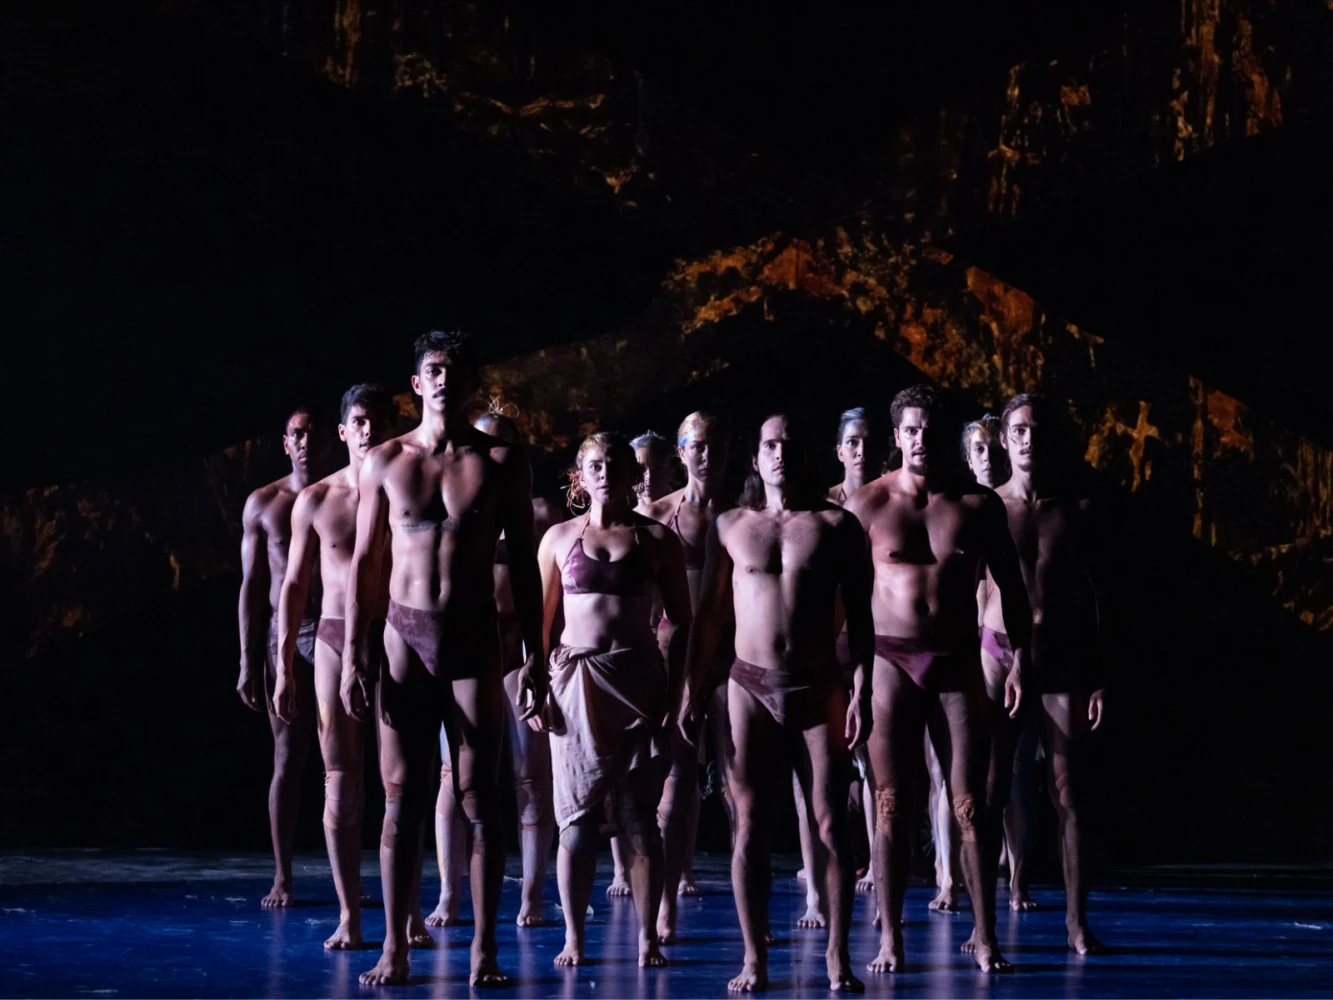 SandSong presented by Bangarra Dance Theatre: What to expect - 6